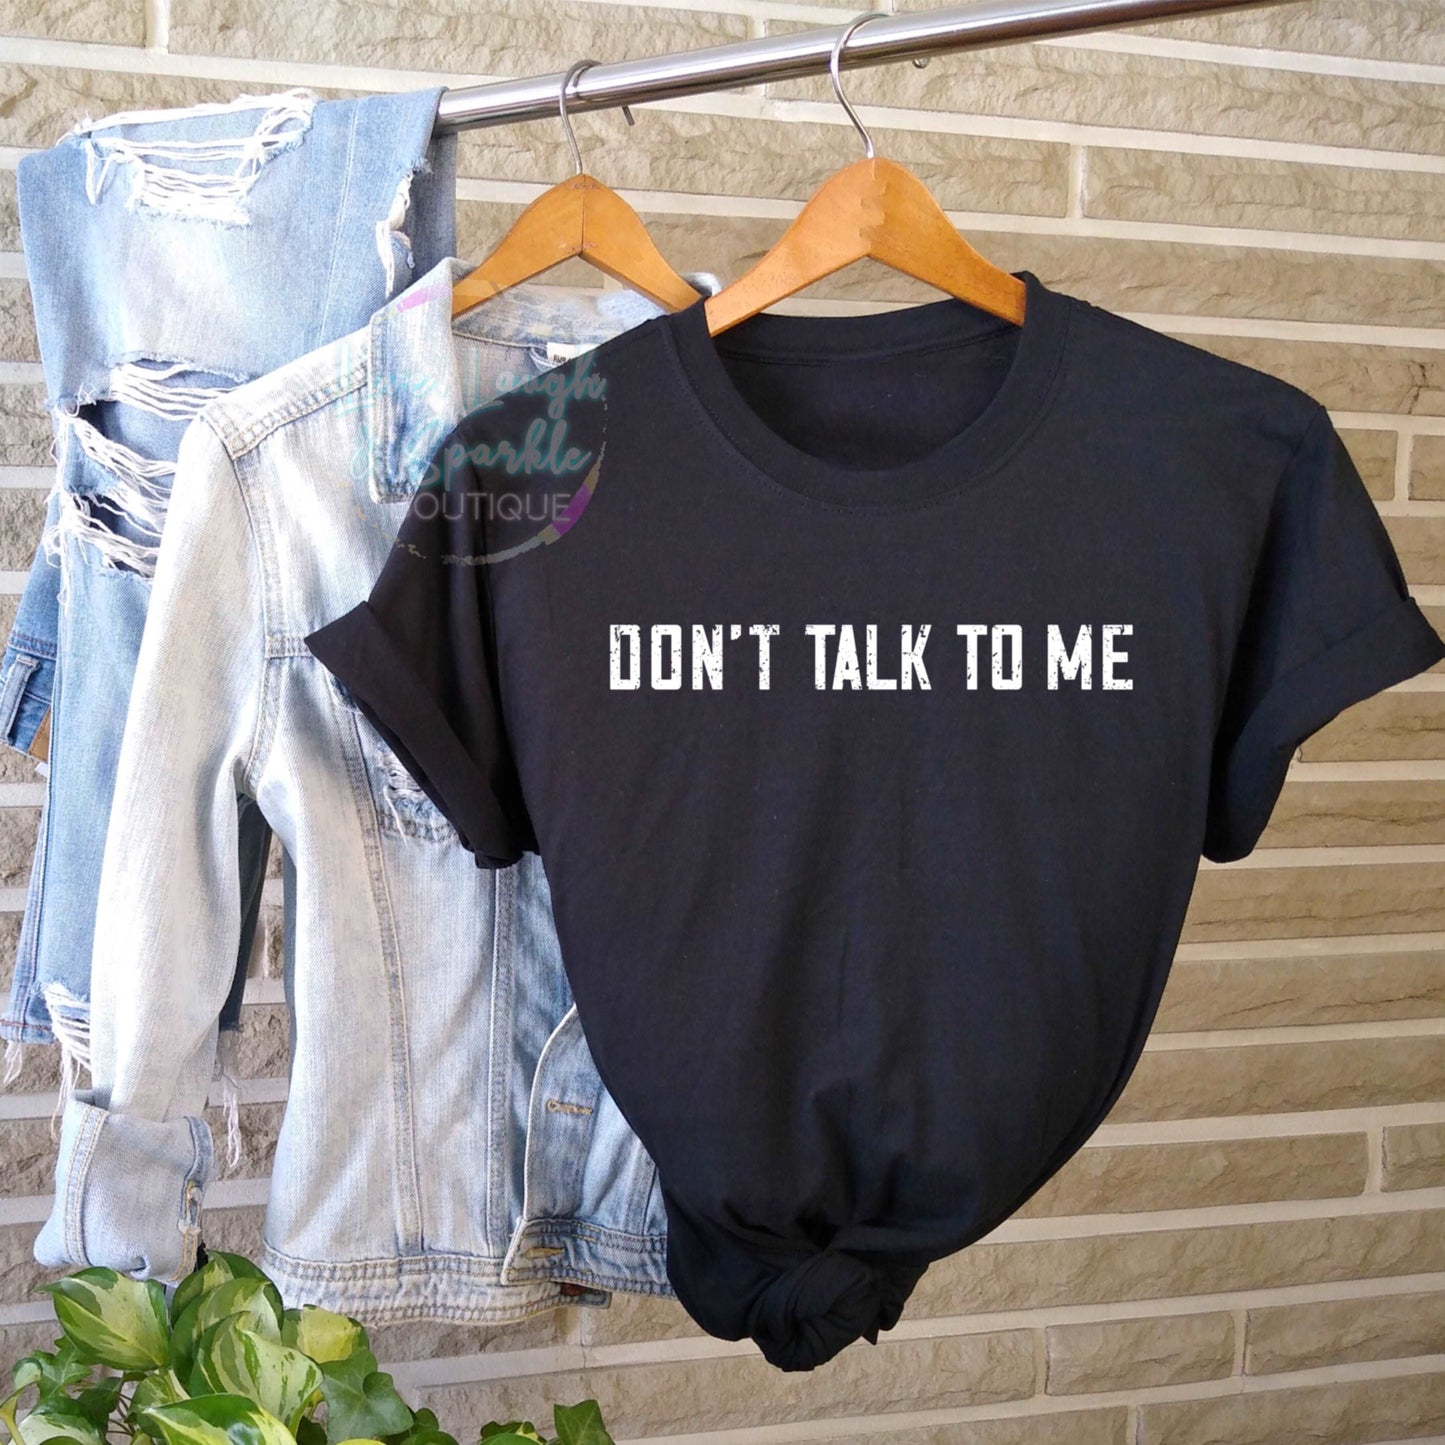 Black tee with Don' talk to me printed on it.